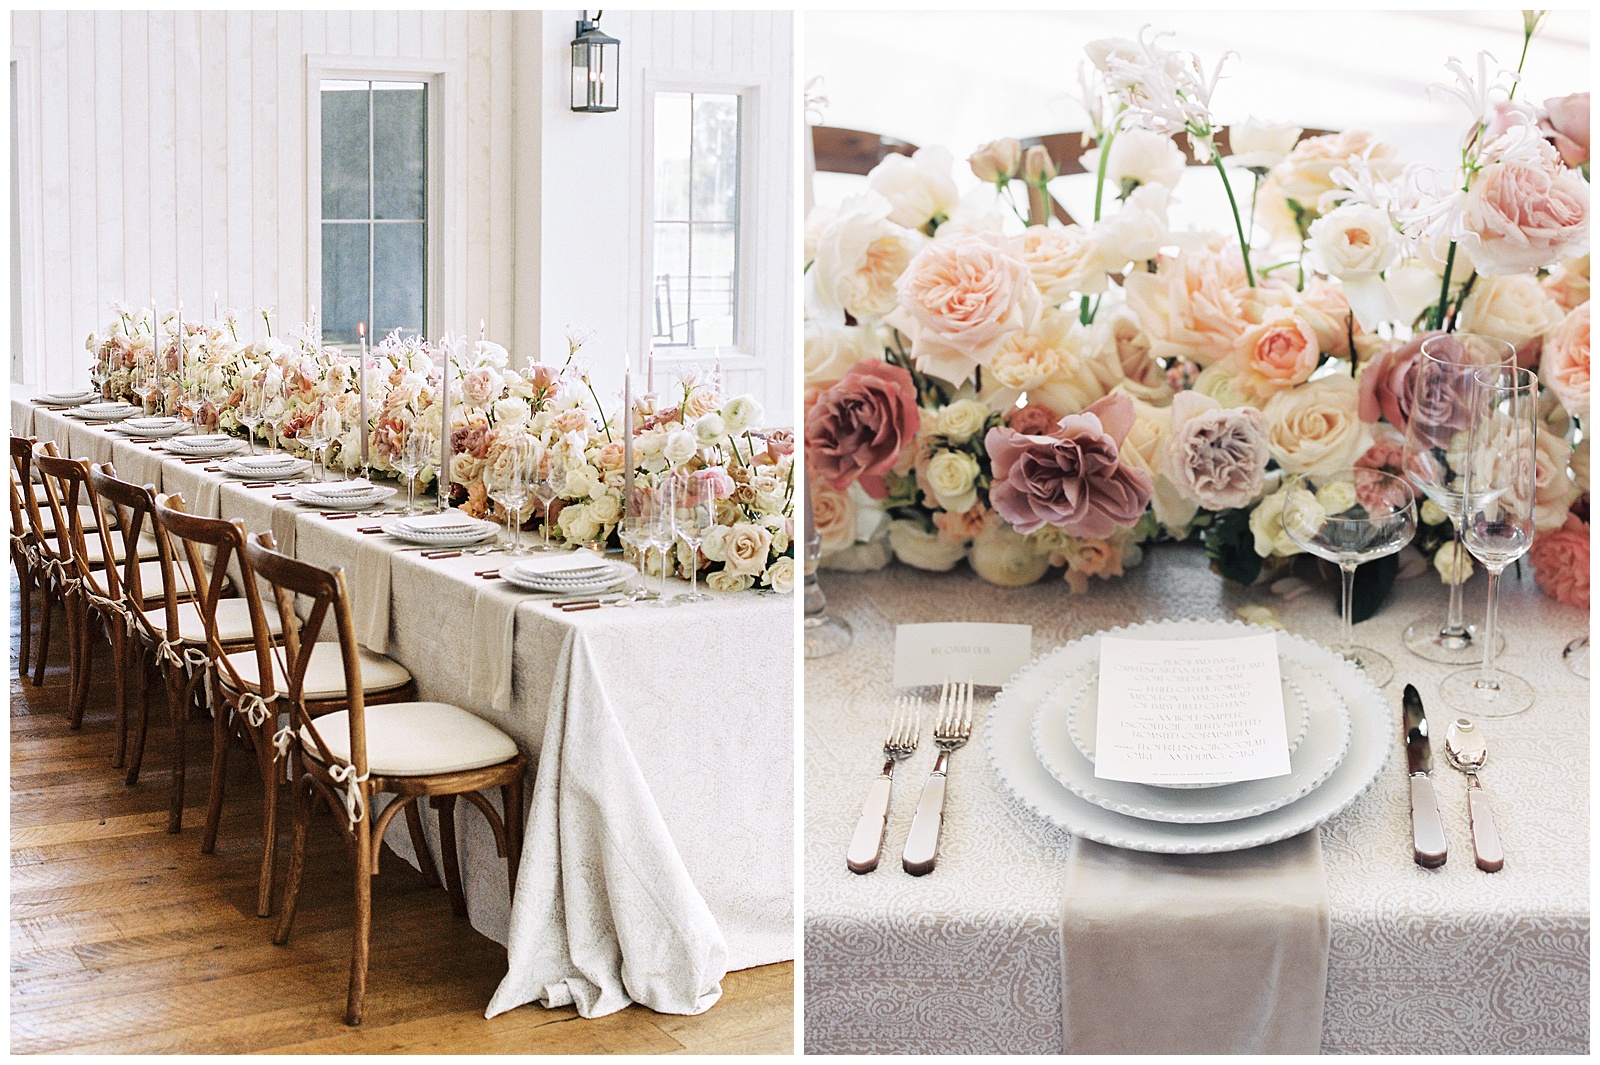 wedding reception inspiration with family style table and pink roses